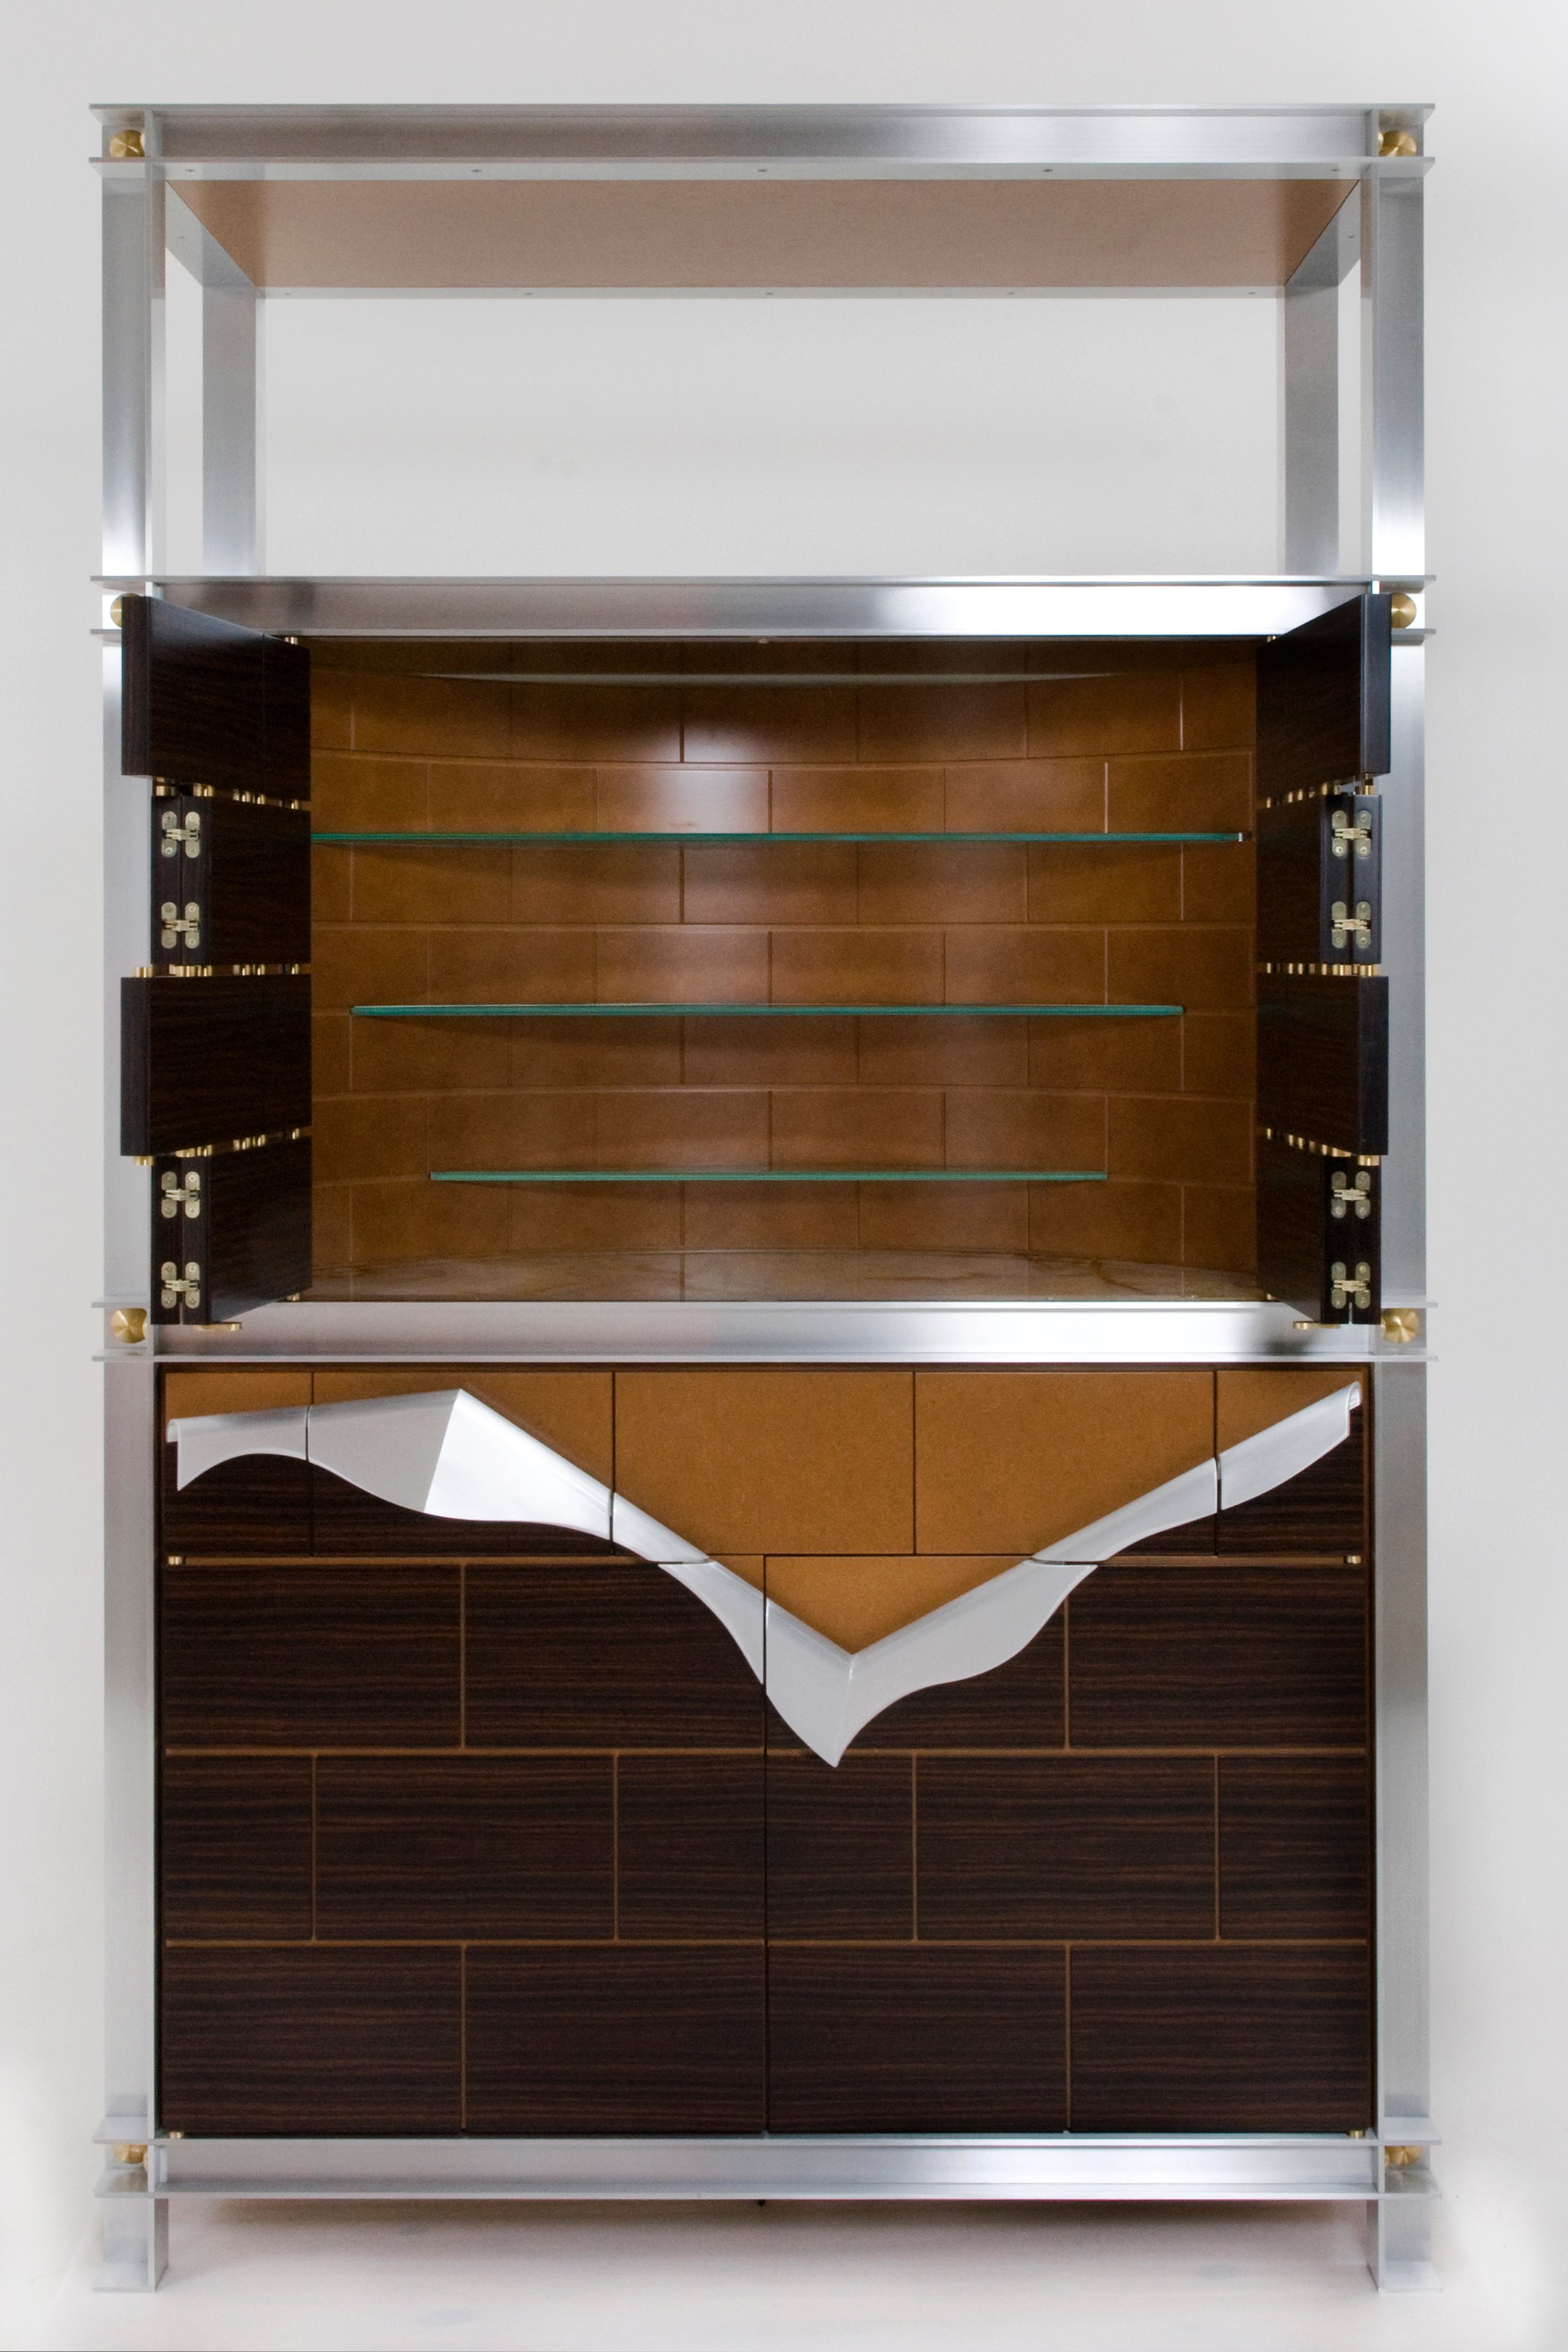 Credenze or sideboard designed by Iain Halliday for the Powerhouse Museum boardroom